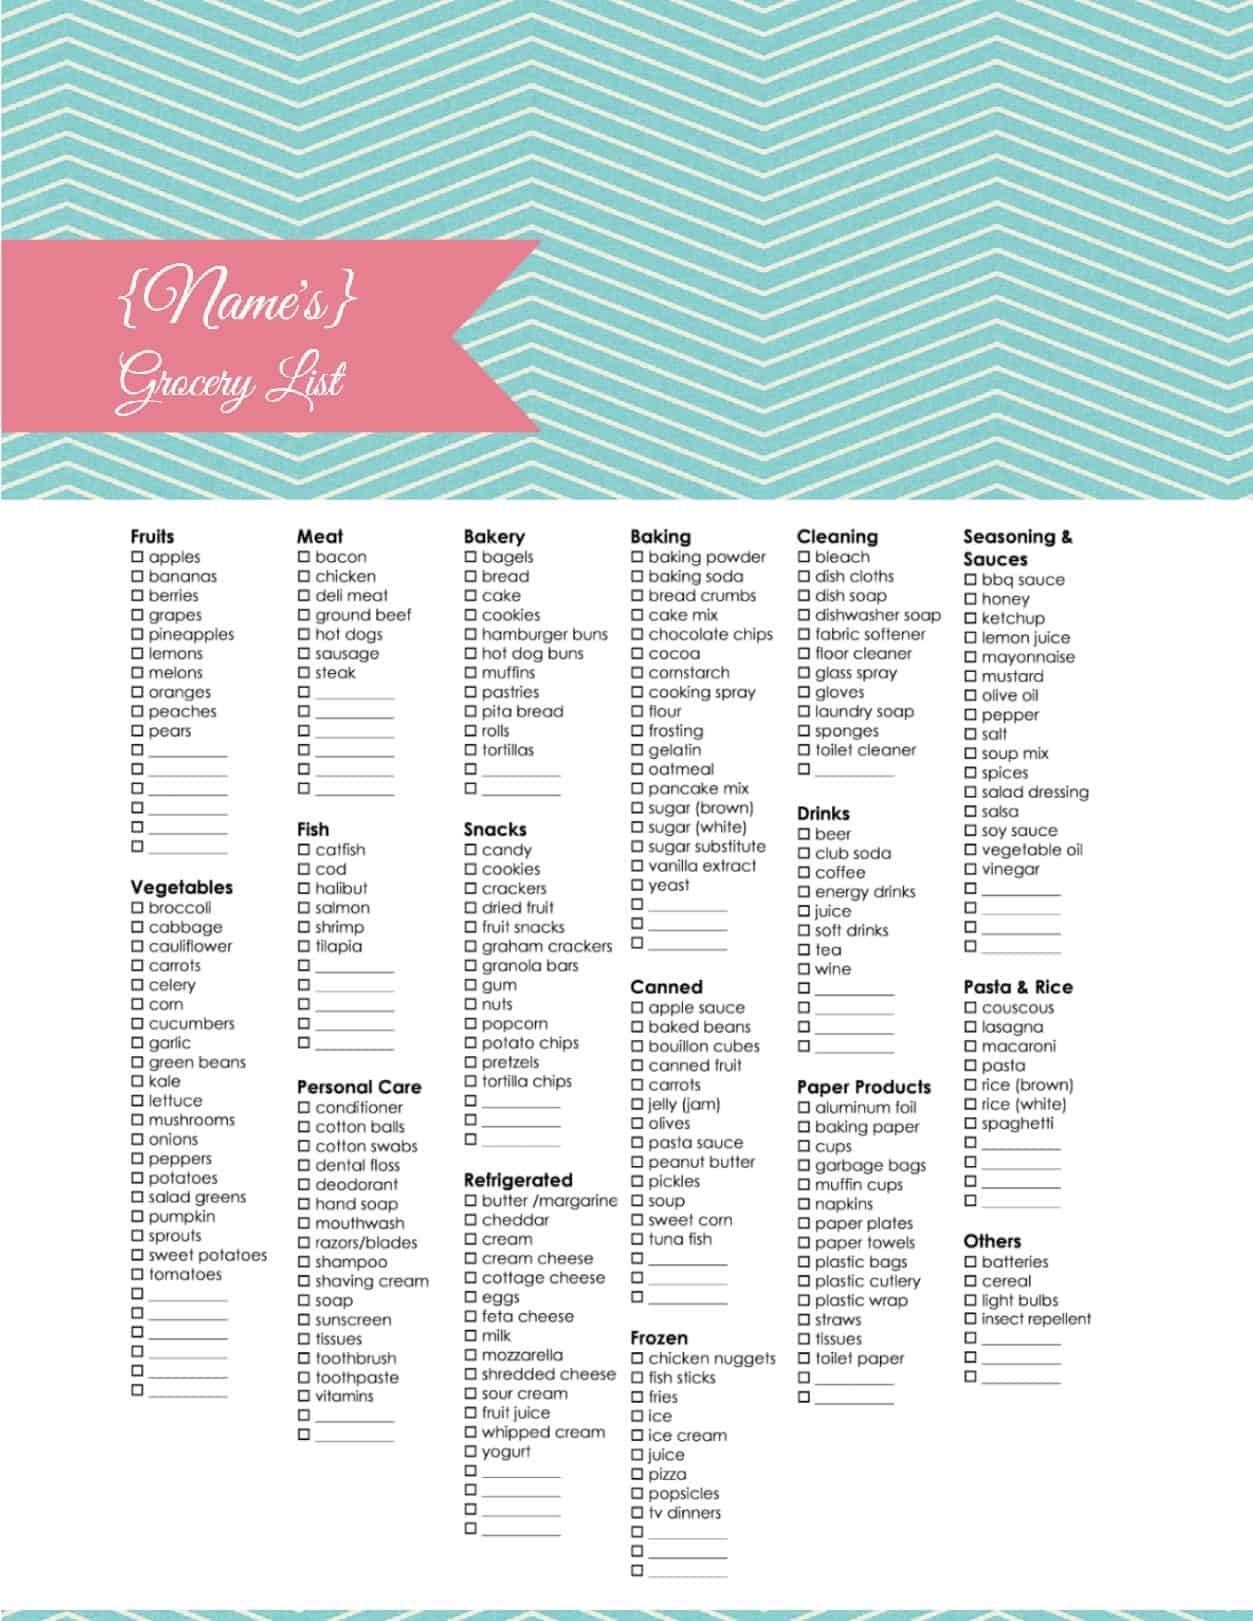 Grocery List Template | Free Printable within Blank Shopping List Template A4 Editable